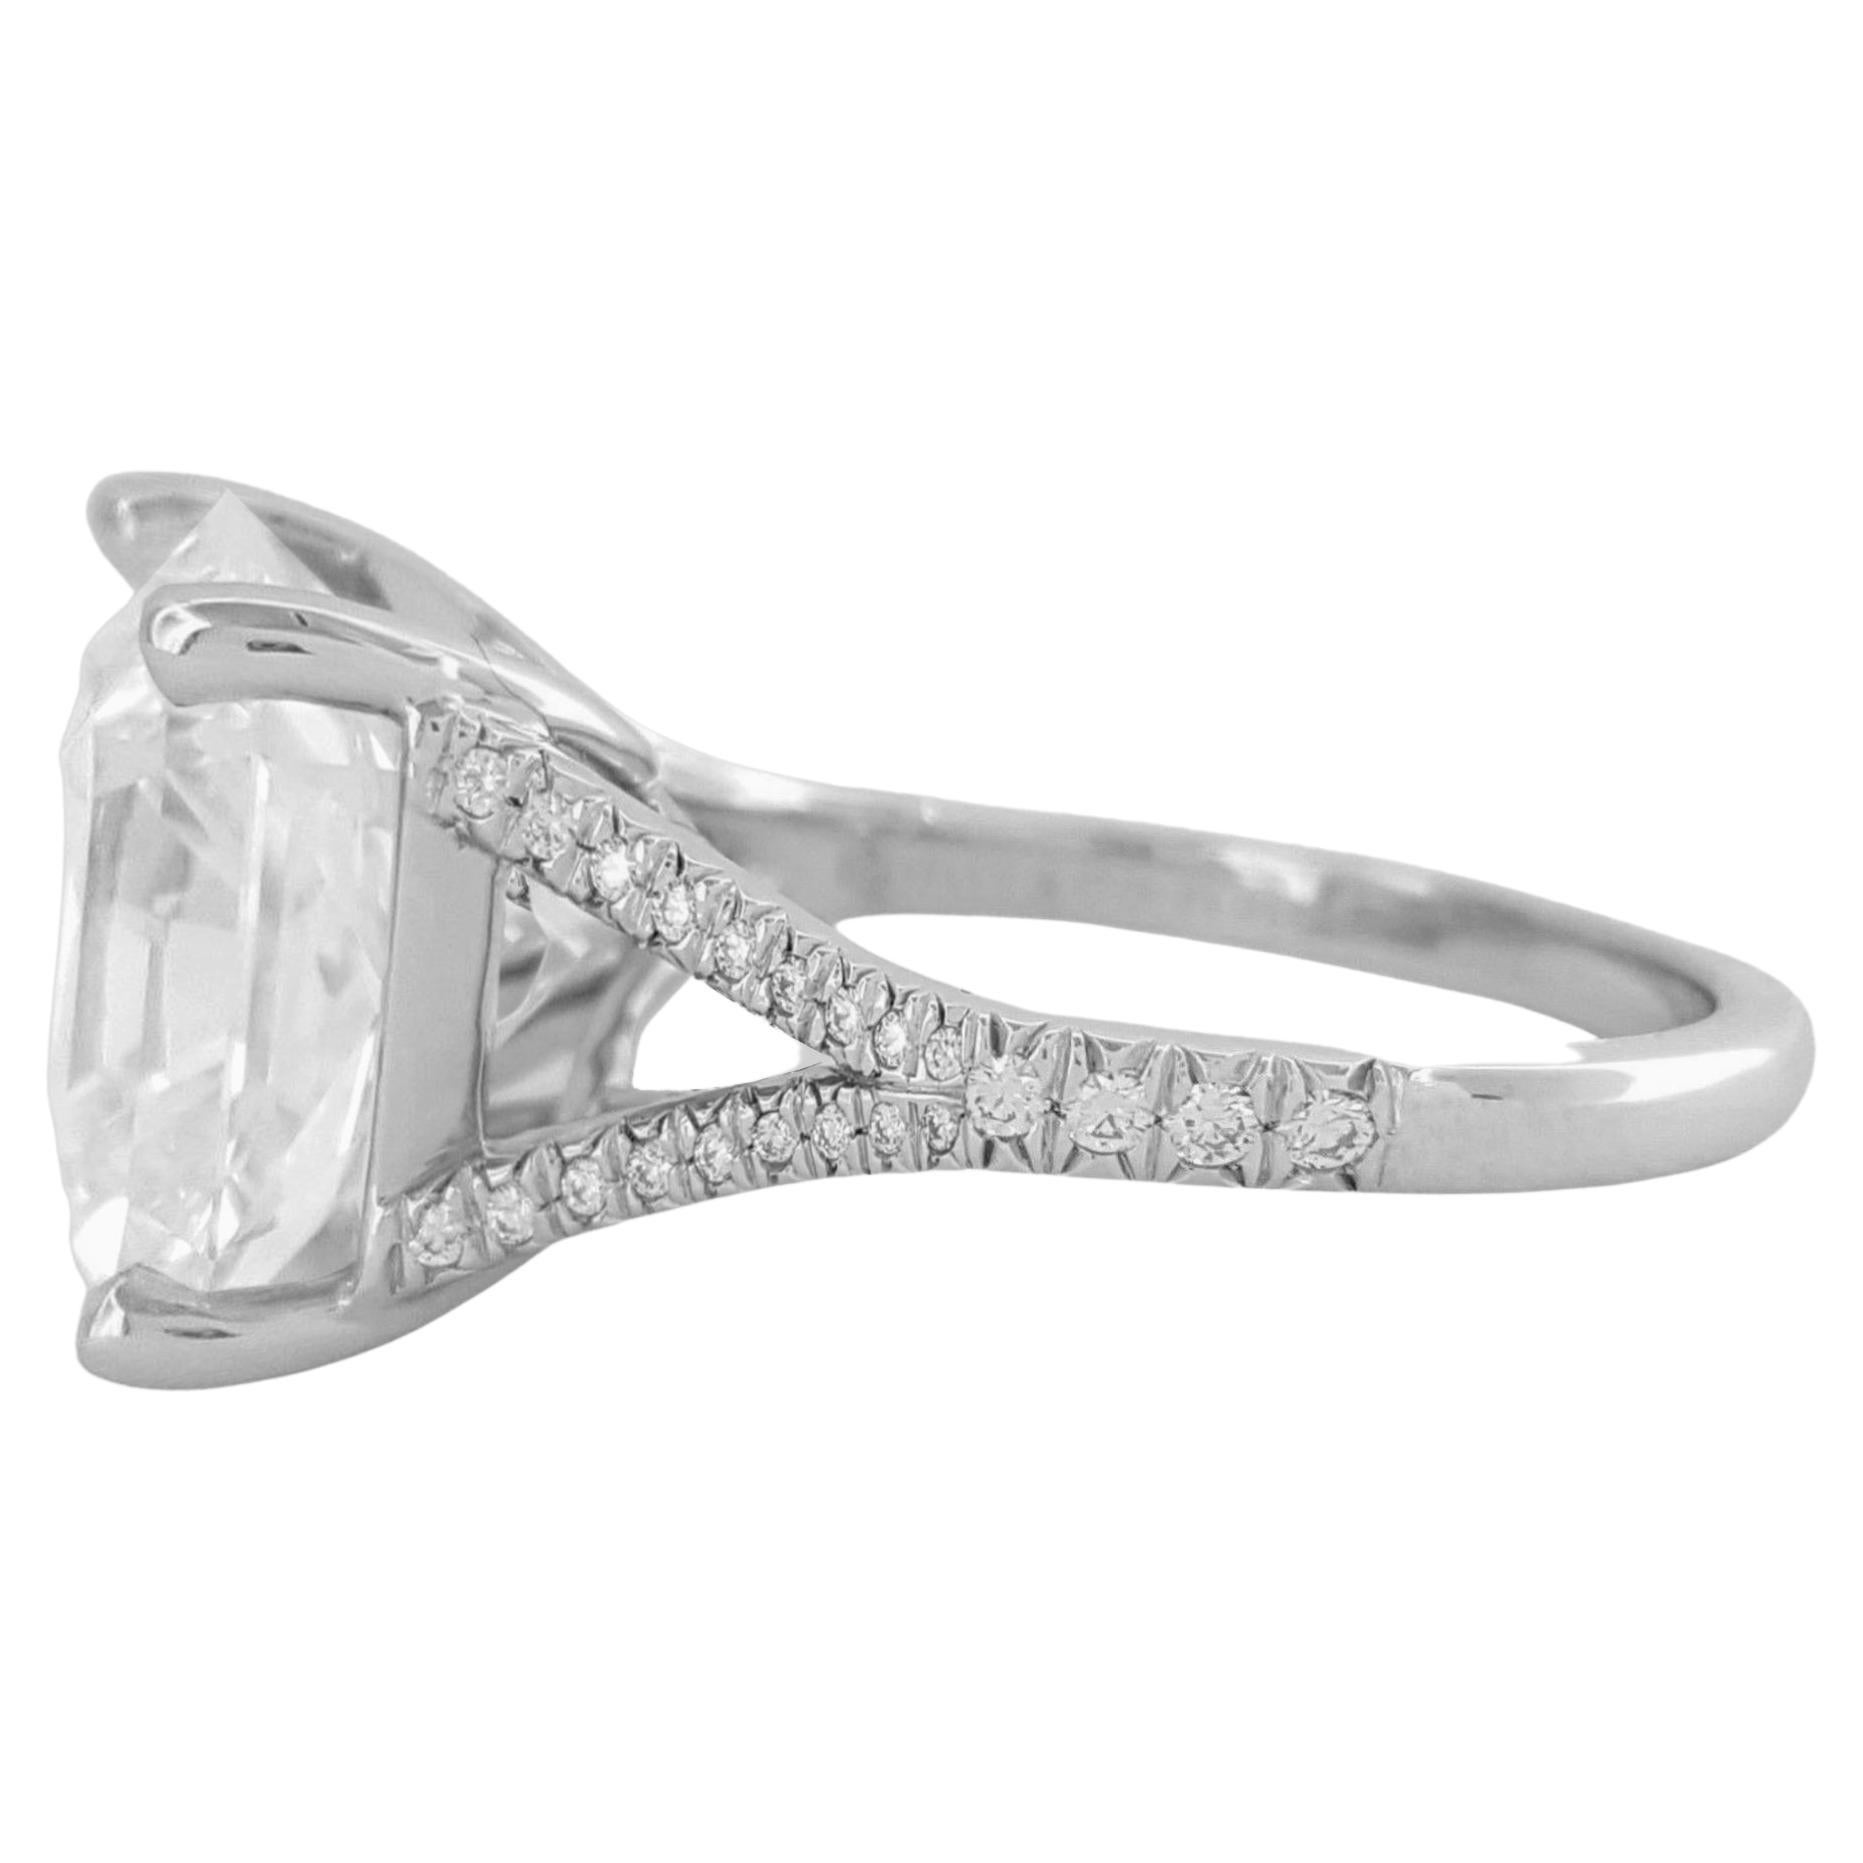 Tiffany & Co. 3.65 ct Platinum Lucida Square Brilliant Cut Diamond Split Shank Engagement Ring.



The ring weighs 6.1 gram, size 6, the center is a Lucida Cut-Cornered Square Brilliant Cut diamond weighing 3.48 ct, G in color, VVS1 in clarity. The